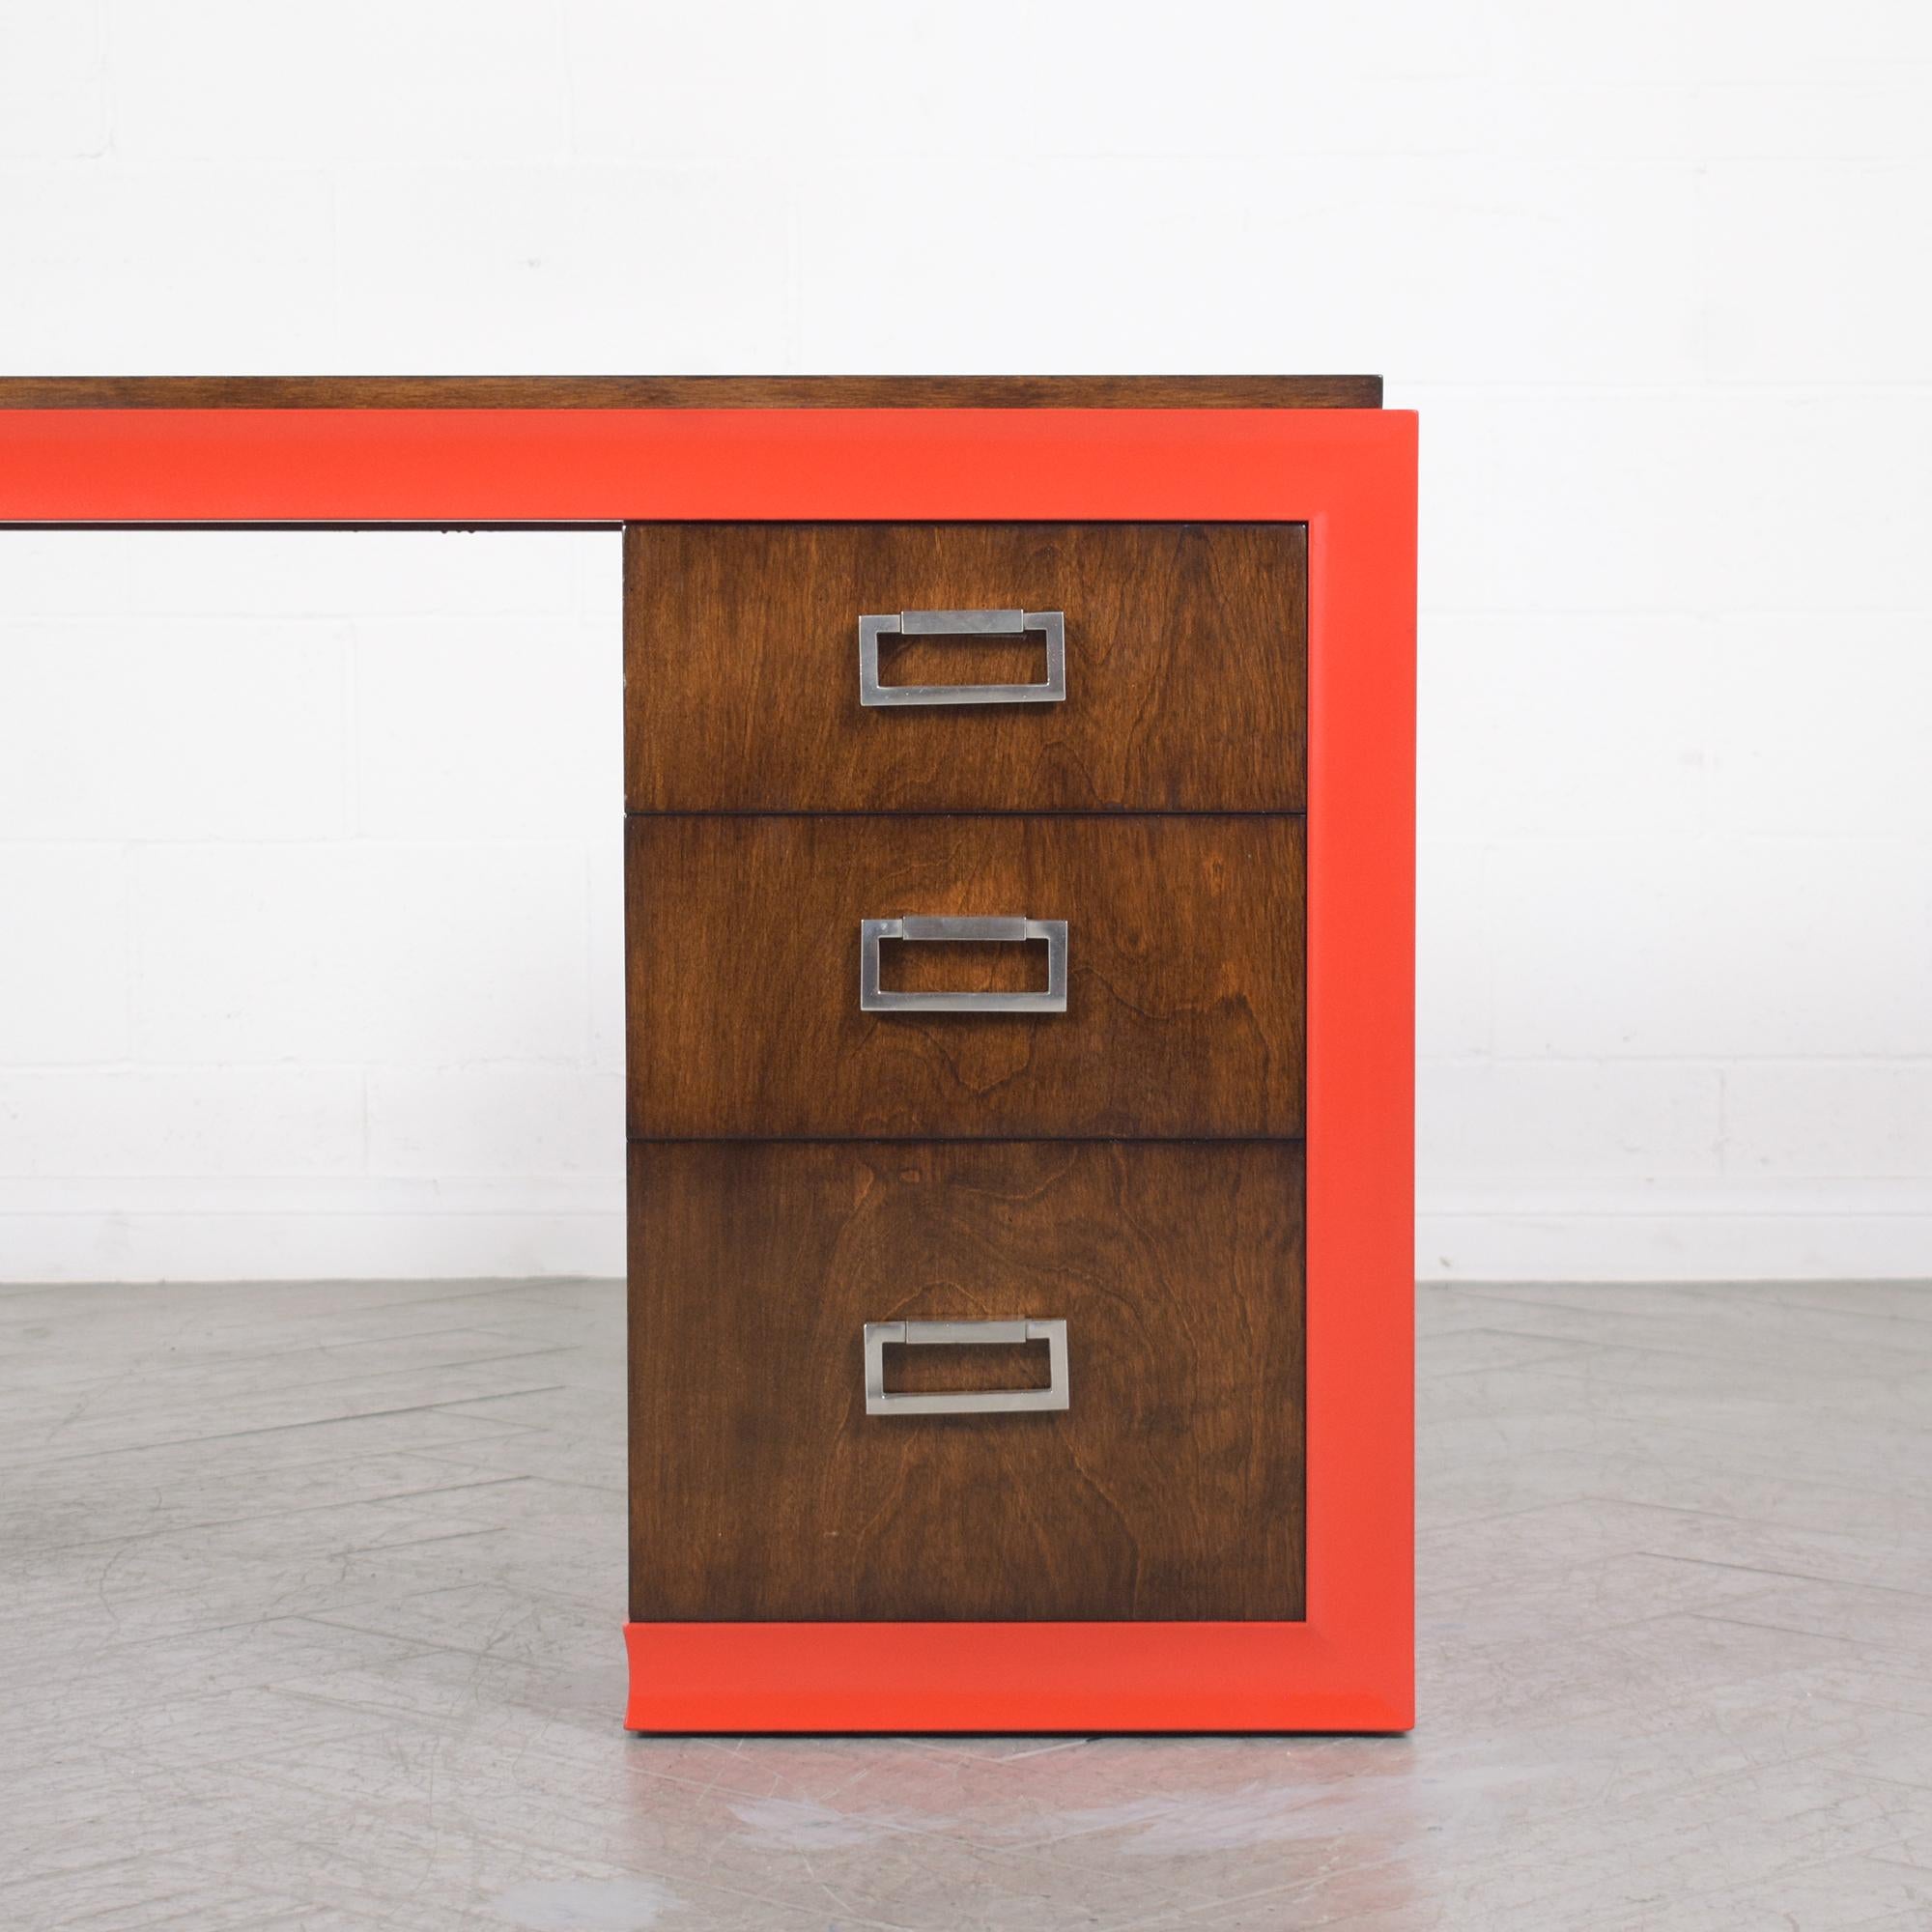 1960s Mid-Century Modern Walnut Desk with Vibrant Red Lacquer Finish In Good Condition For Sale In Los Angeles, CA